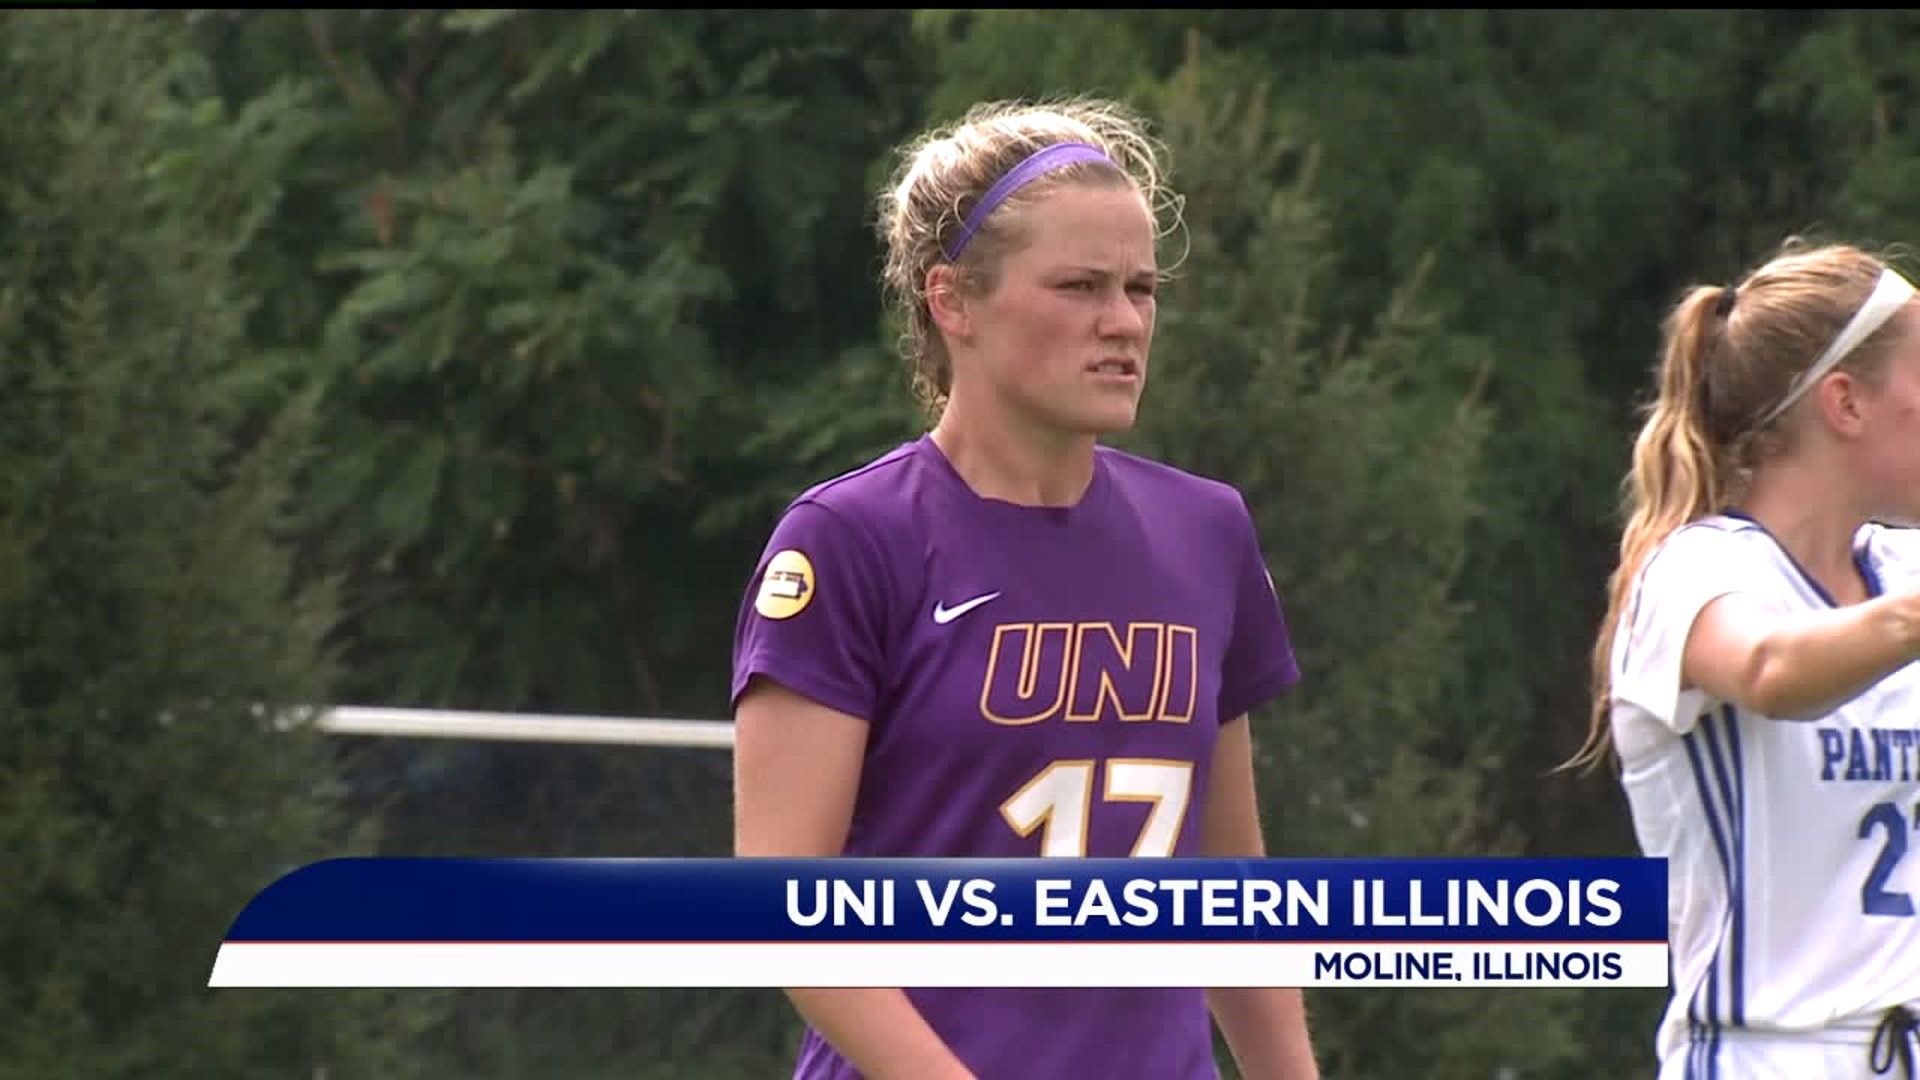 Local soccer product back home for UNI vs. Eastern Illinois game